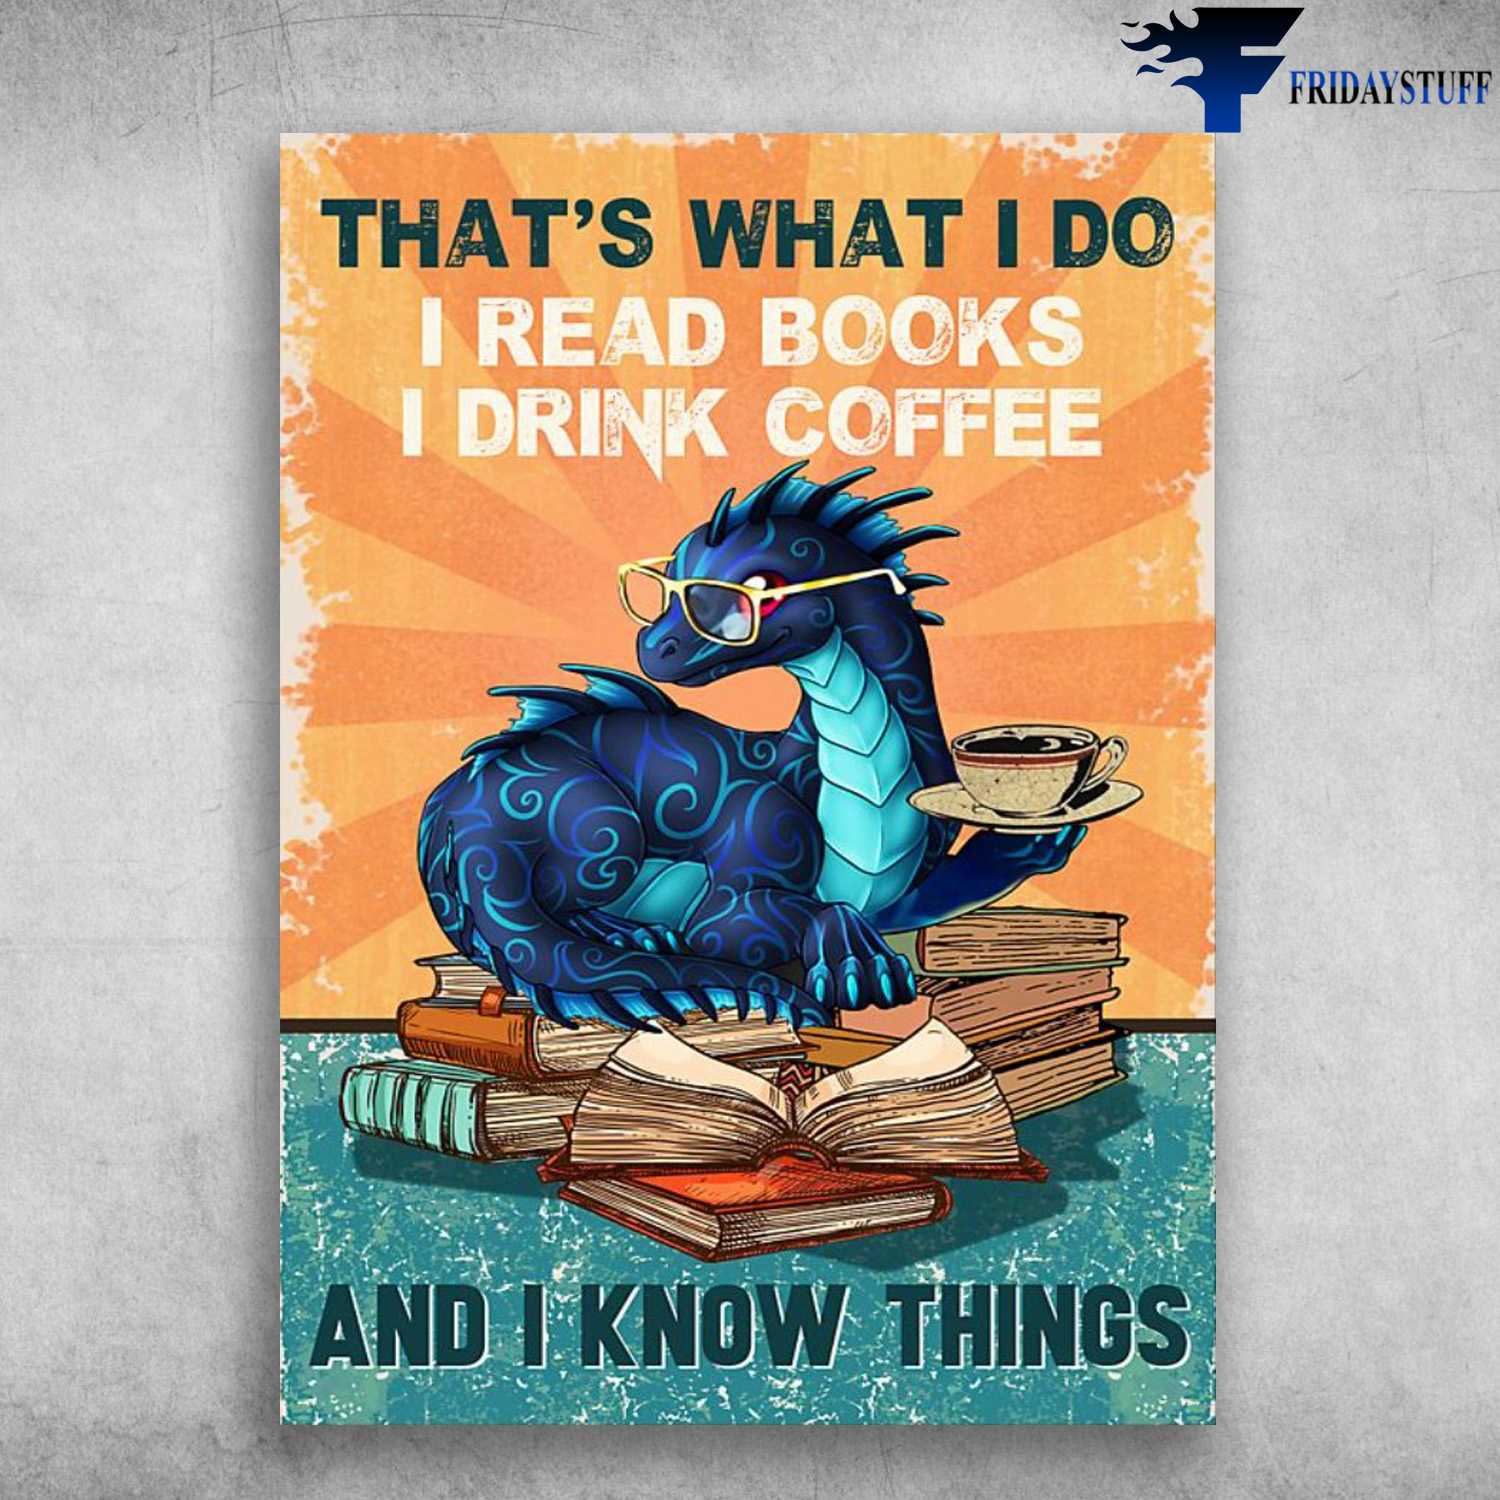 Dragon Reading, Book And Coffee - That's What I Do, I Read Books, I Drink Coffee, And I Know Things